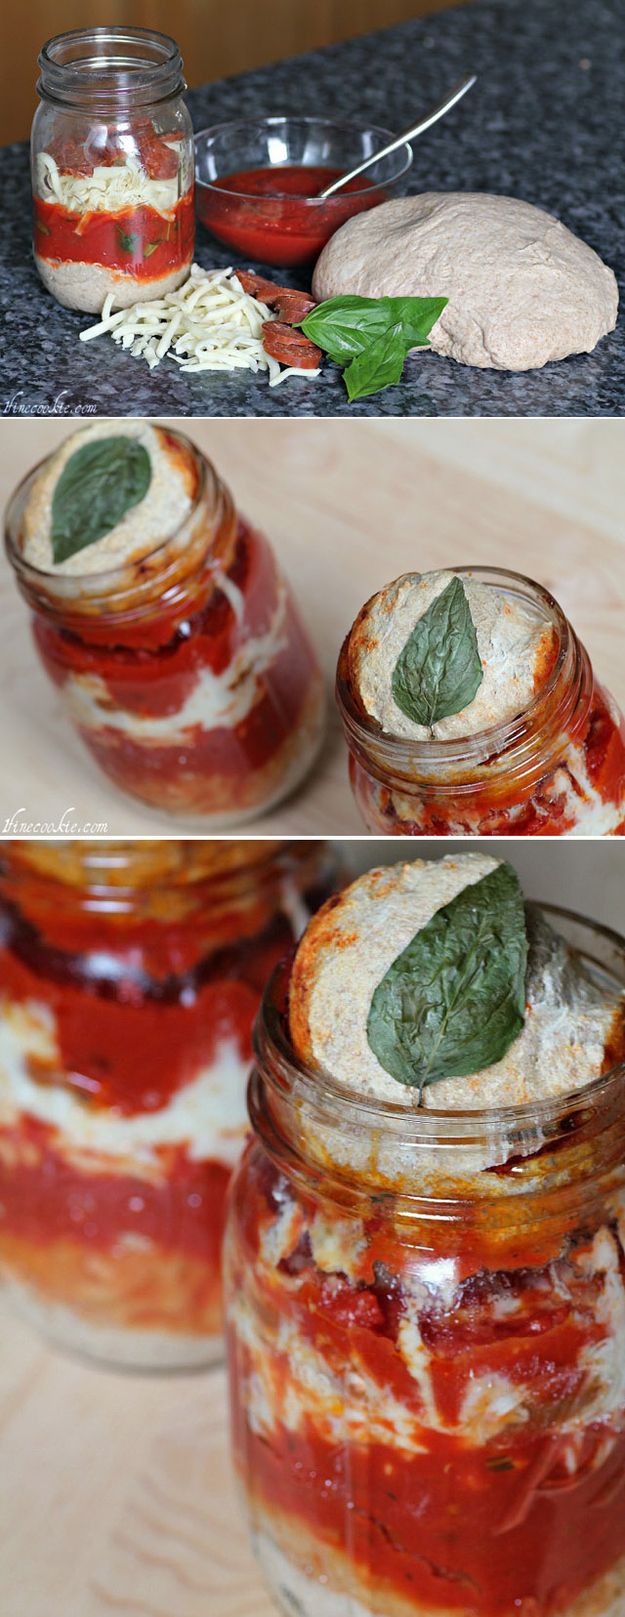 11. Pizza in a Jar -   42 Easy Things To Do With Mason Jars